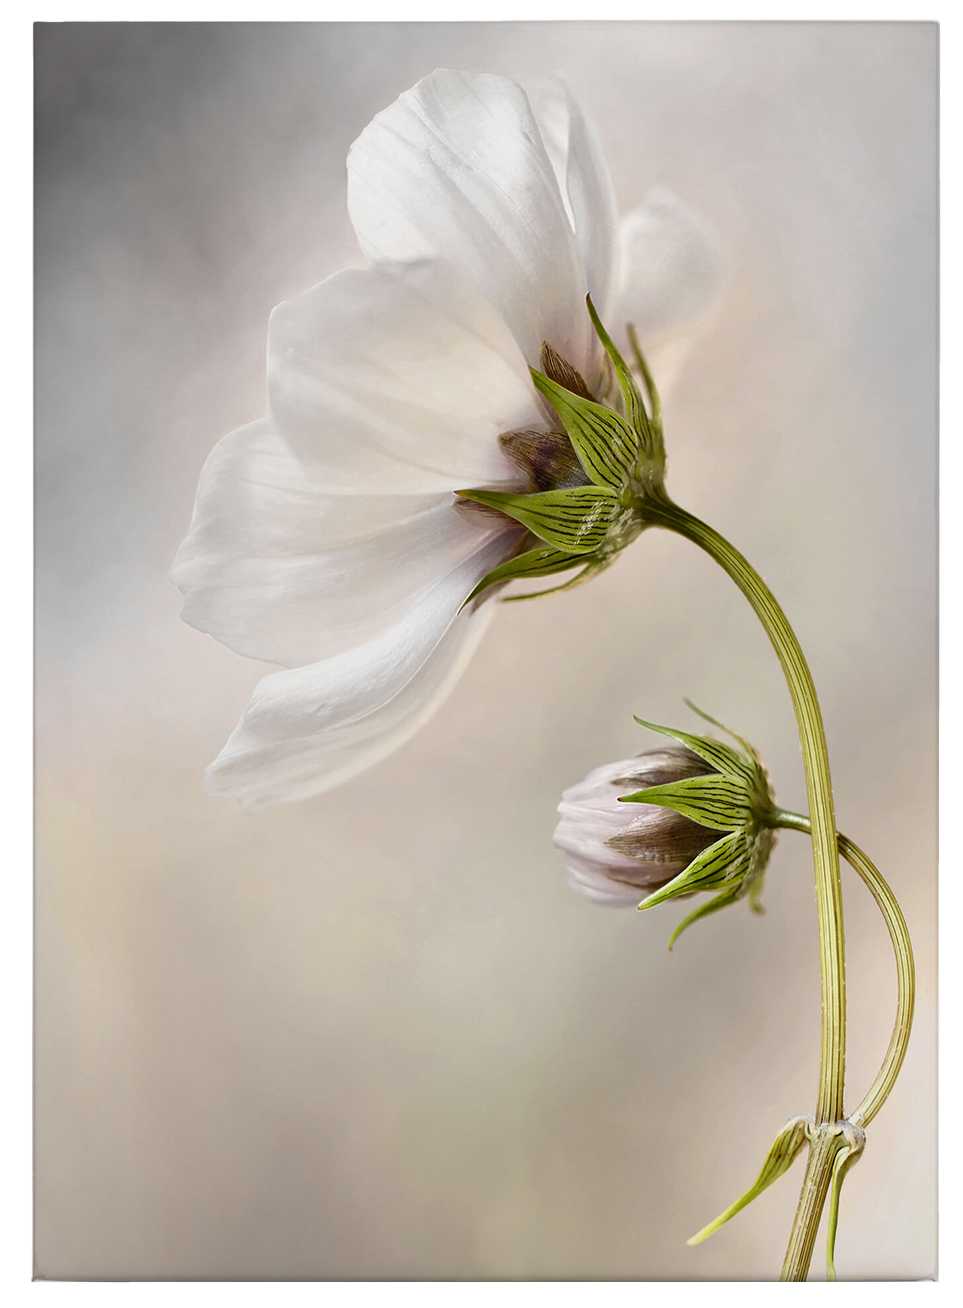             Canvas print flower head, photograph by Disher – white
        